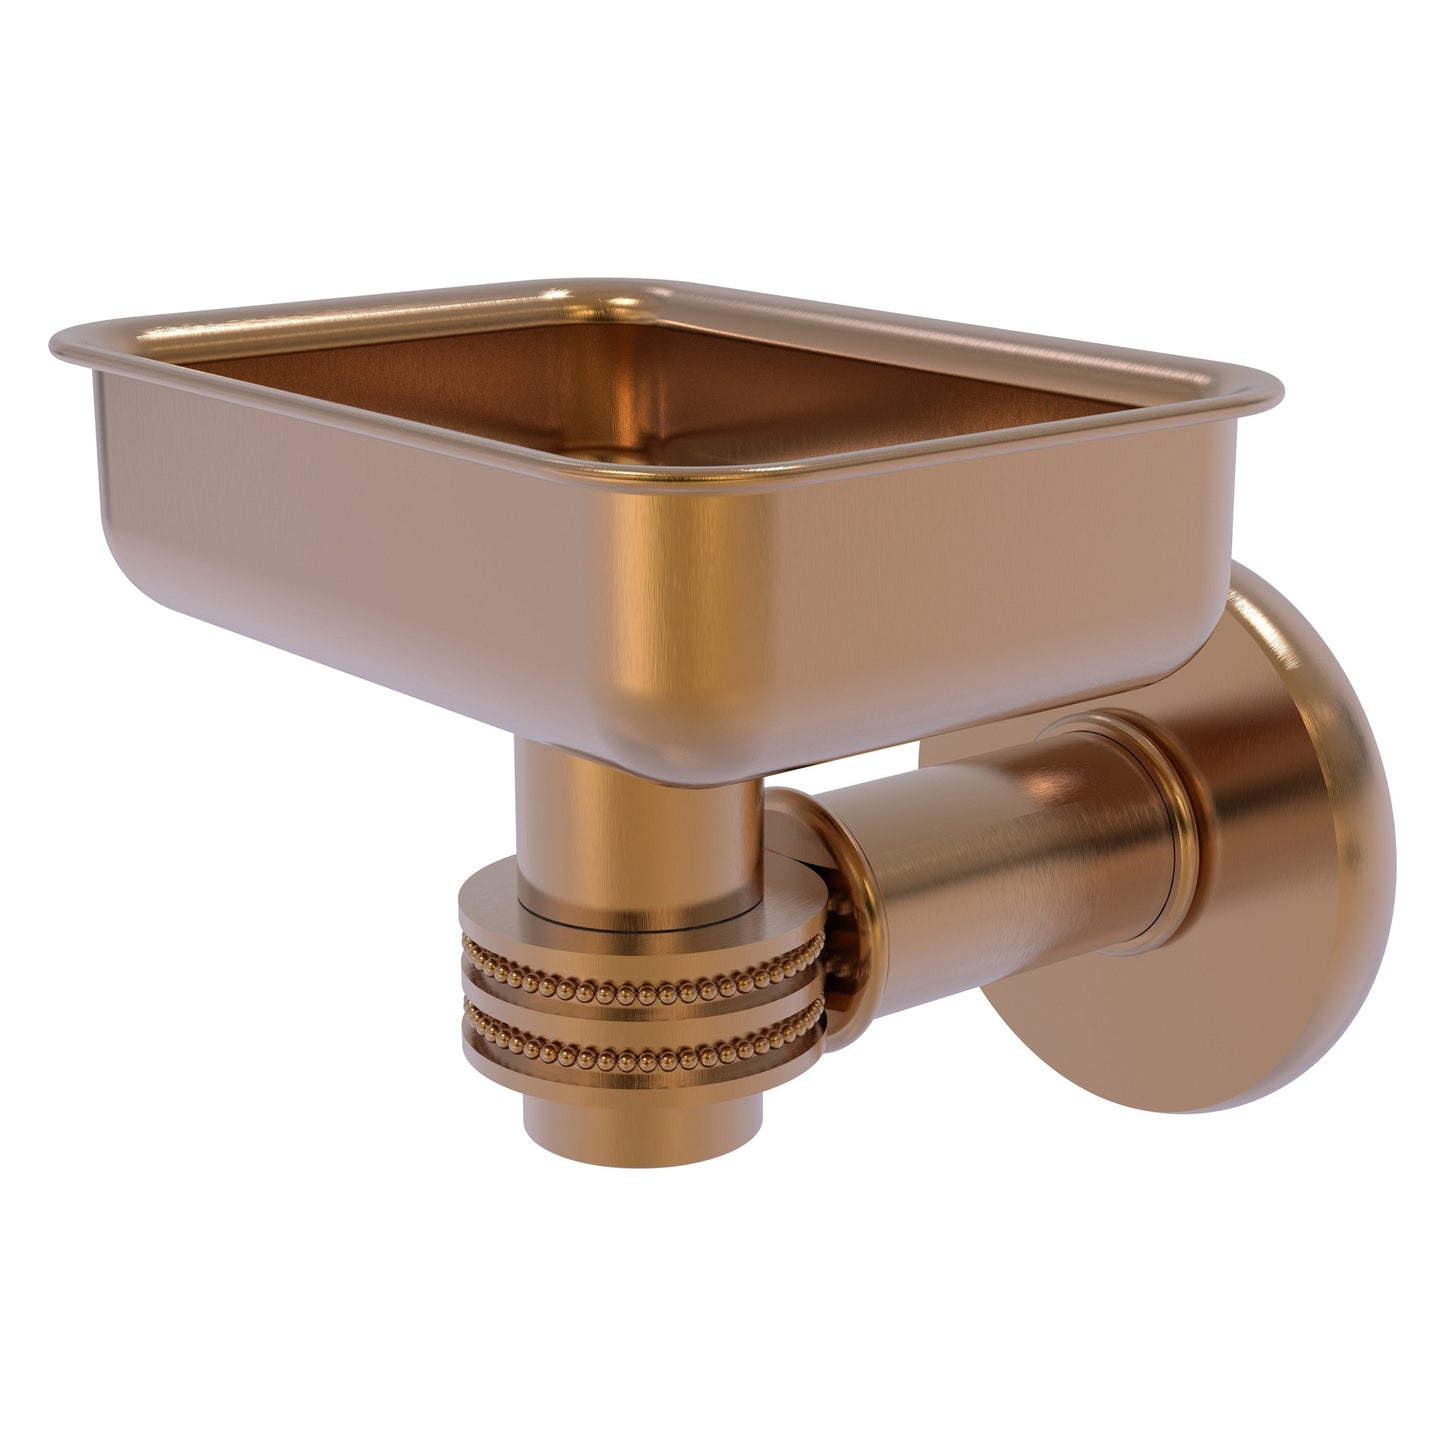 Allied Brass Continental 4.5" x 3.5" Brushed Bronze Solid Brass Wall-Mounted Soap Dish Holder with Dotted Accents